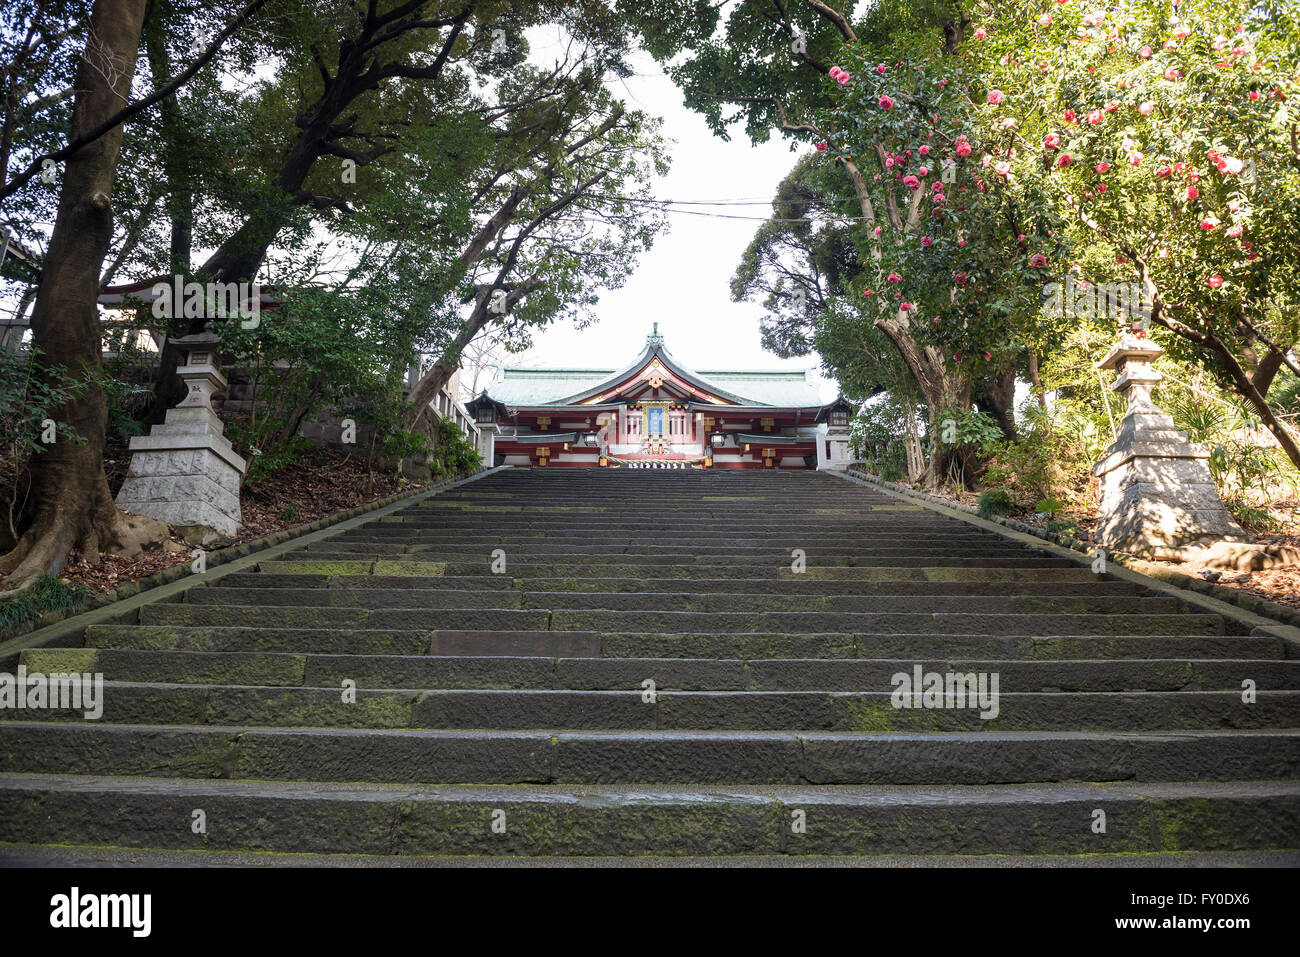 Shinto Hie Shrine in Nagatacho district, Chiyoda special ward of Tokyo, Japan Stock Photo